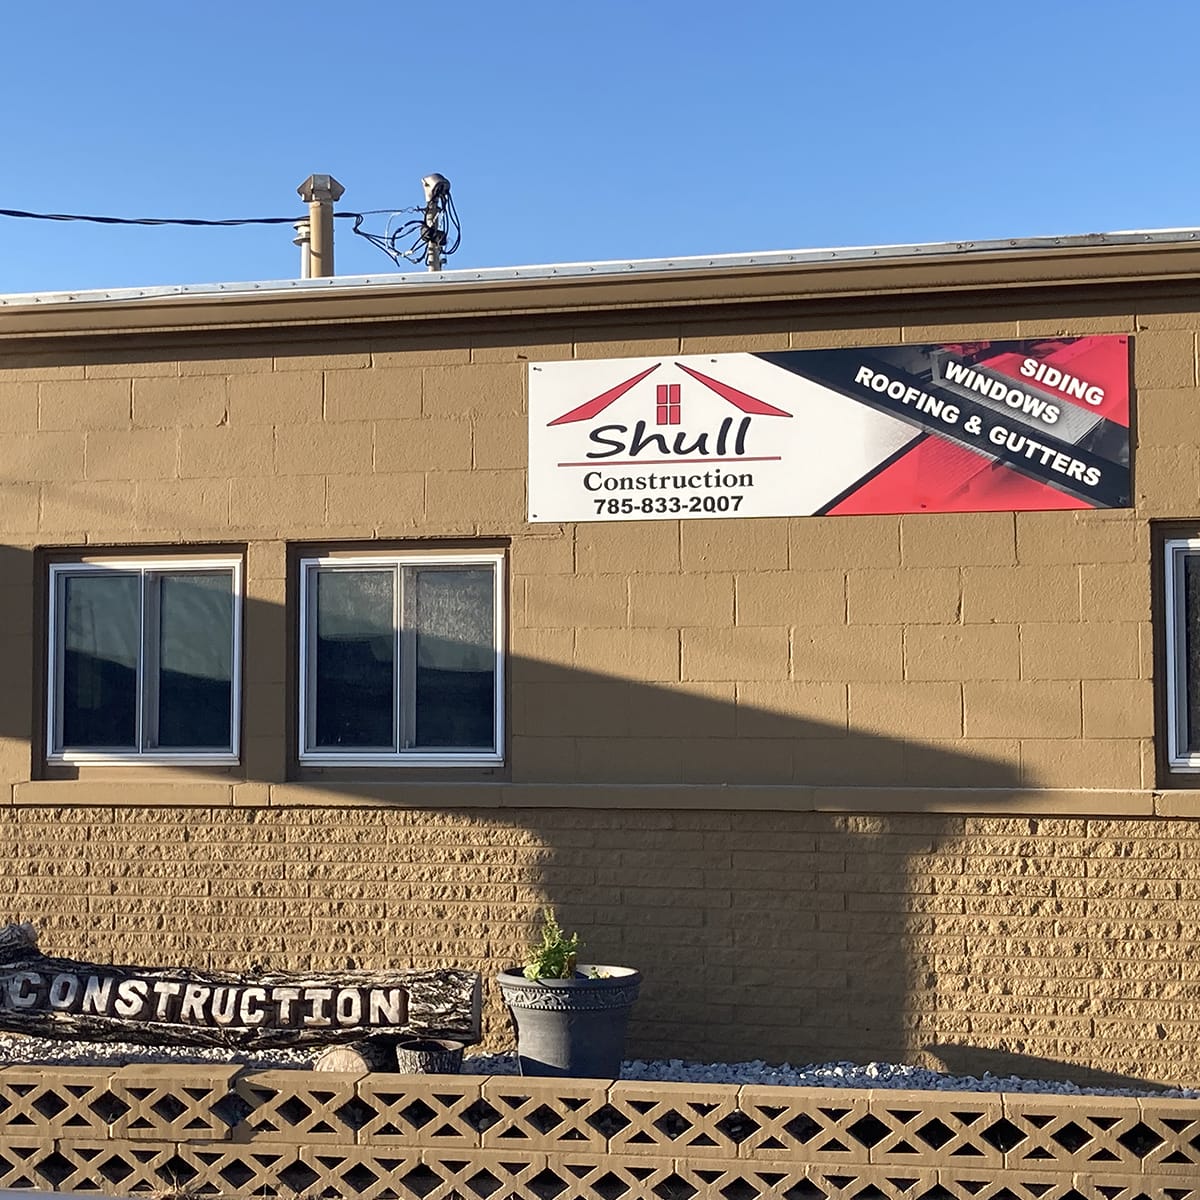 About us - Shull Construction